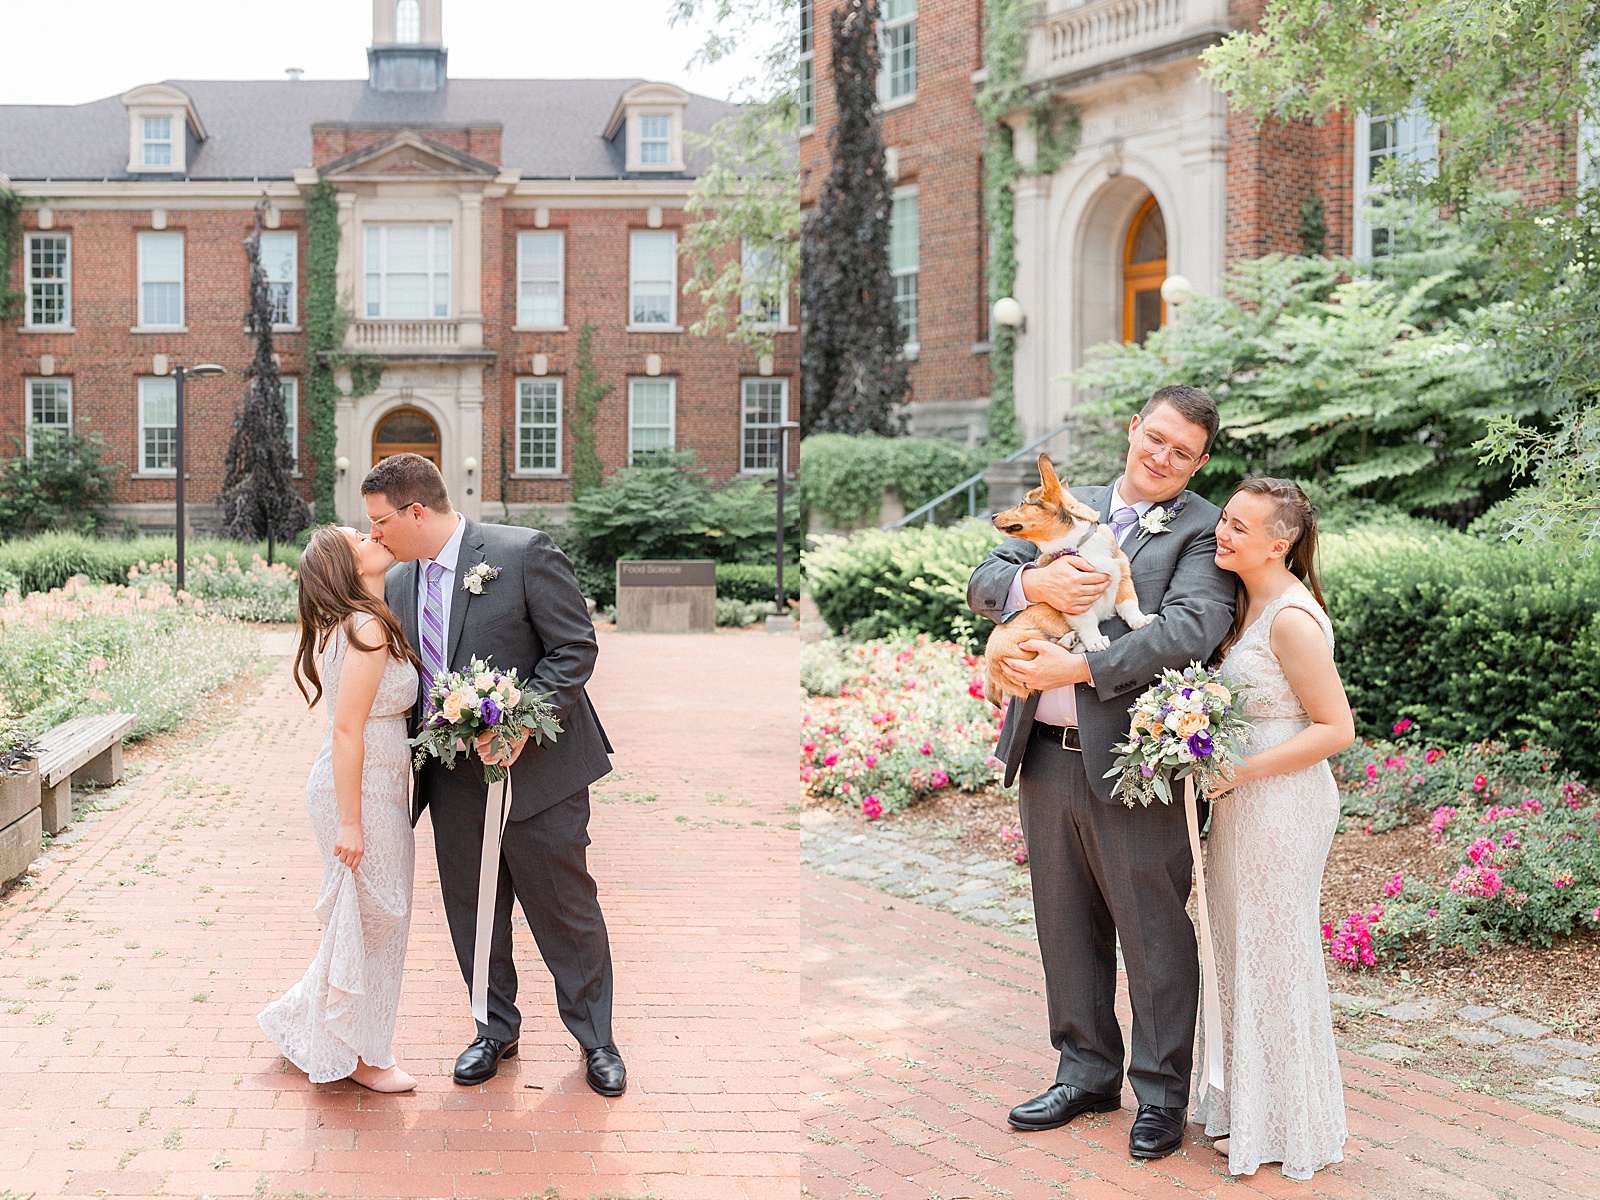 Bride and Groom photos at the University of Guelph